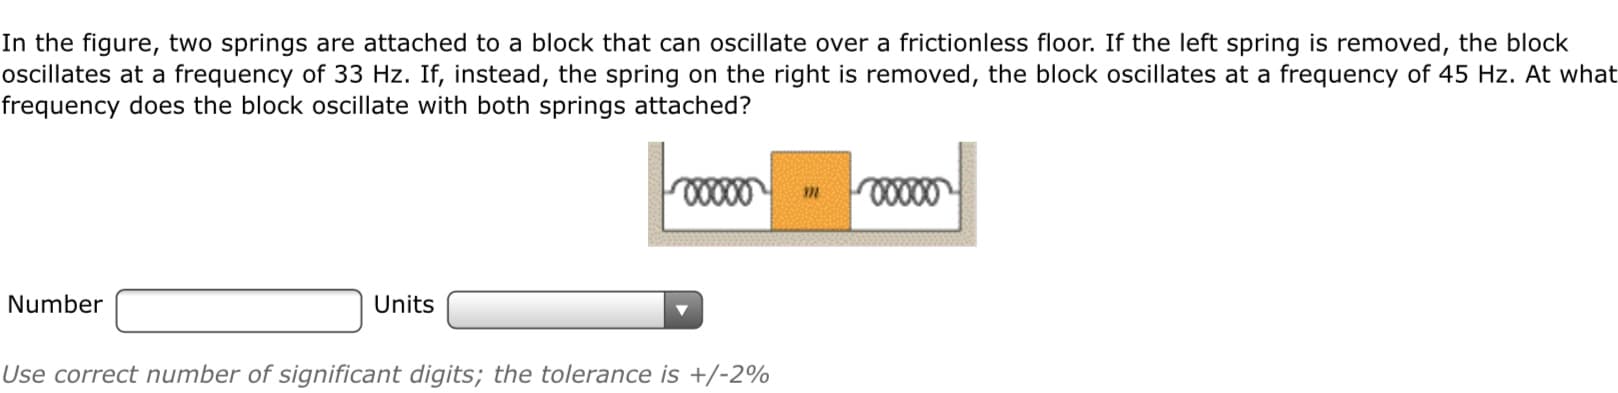 In the figure, two springs are attached to a block that can oscillate over a frictionless floor. If the left spring is removed, the block
oscillates at a frequency of 33 Hz. If, instead, the spring on the right is removed, the block oscillates at a frequency of 45 Hz. At what
frequency does the block oscillate with both springs attached?
0000
Number
Units
Use correct number of significant digits; the tolerance is +/-2%
